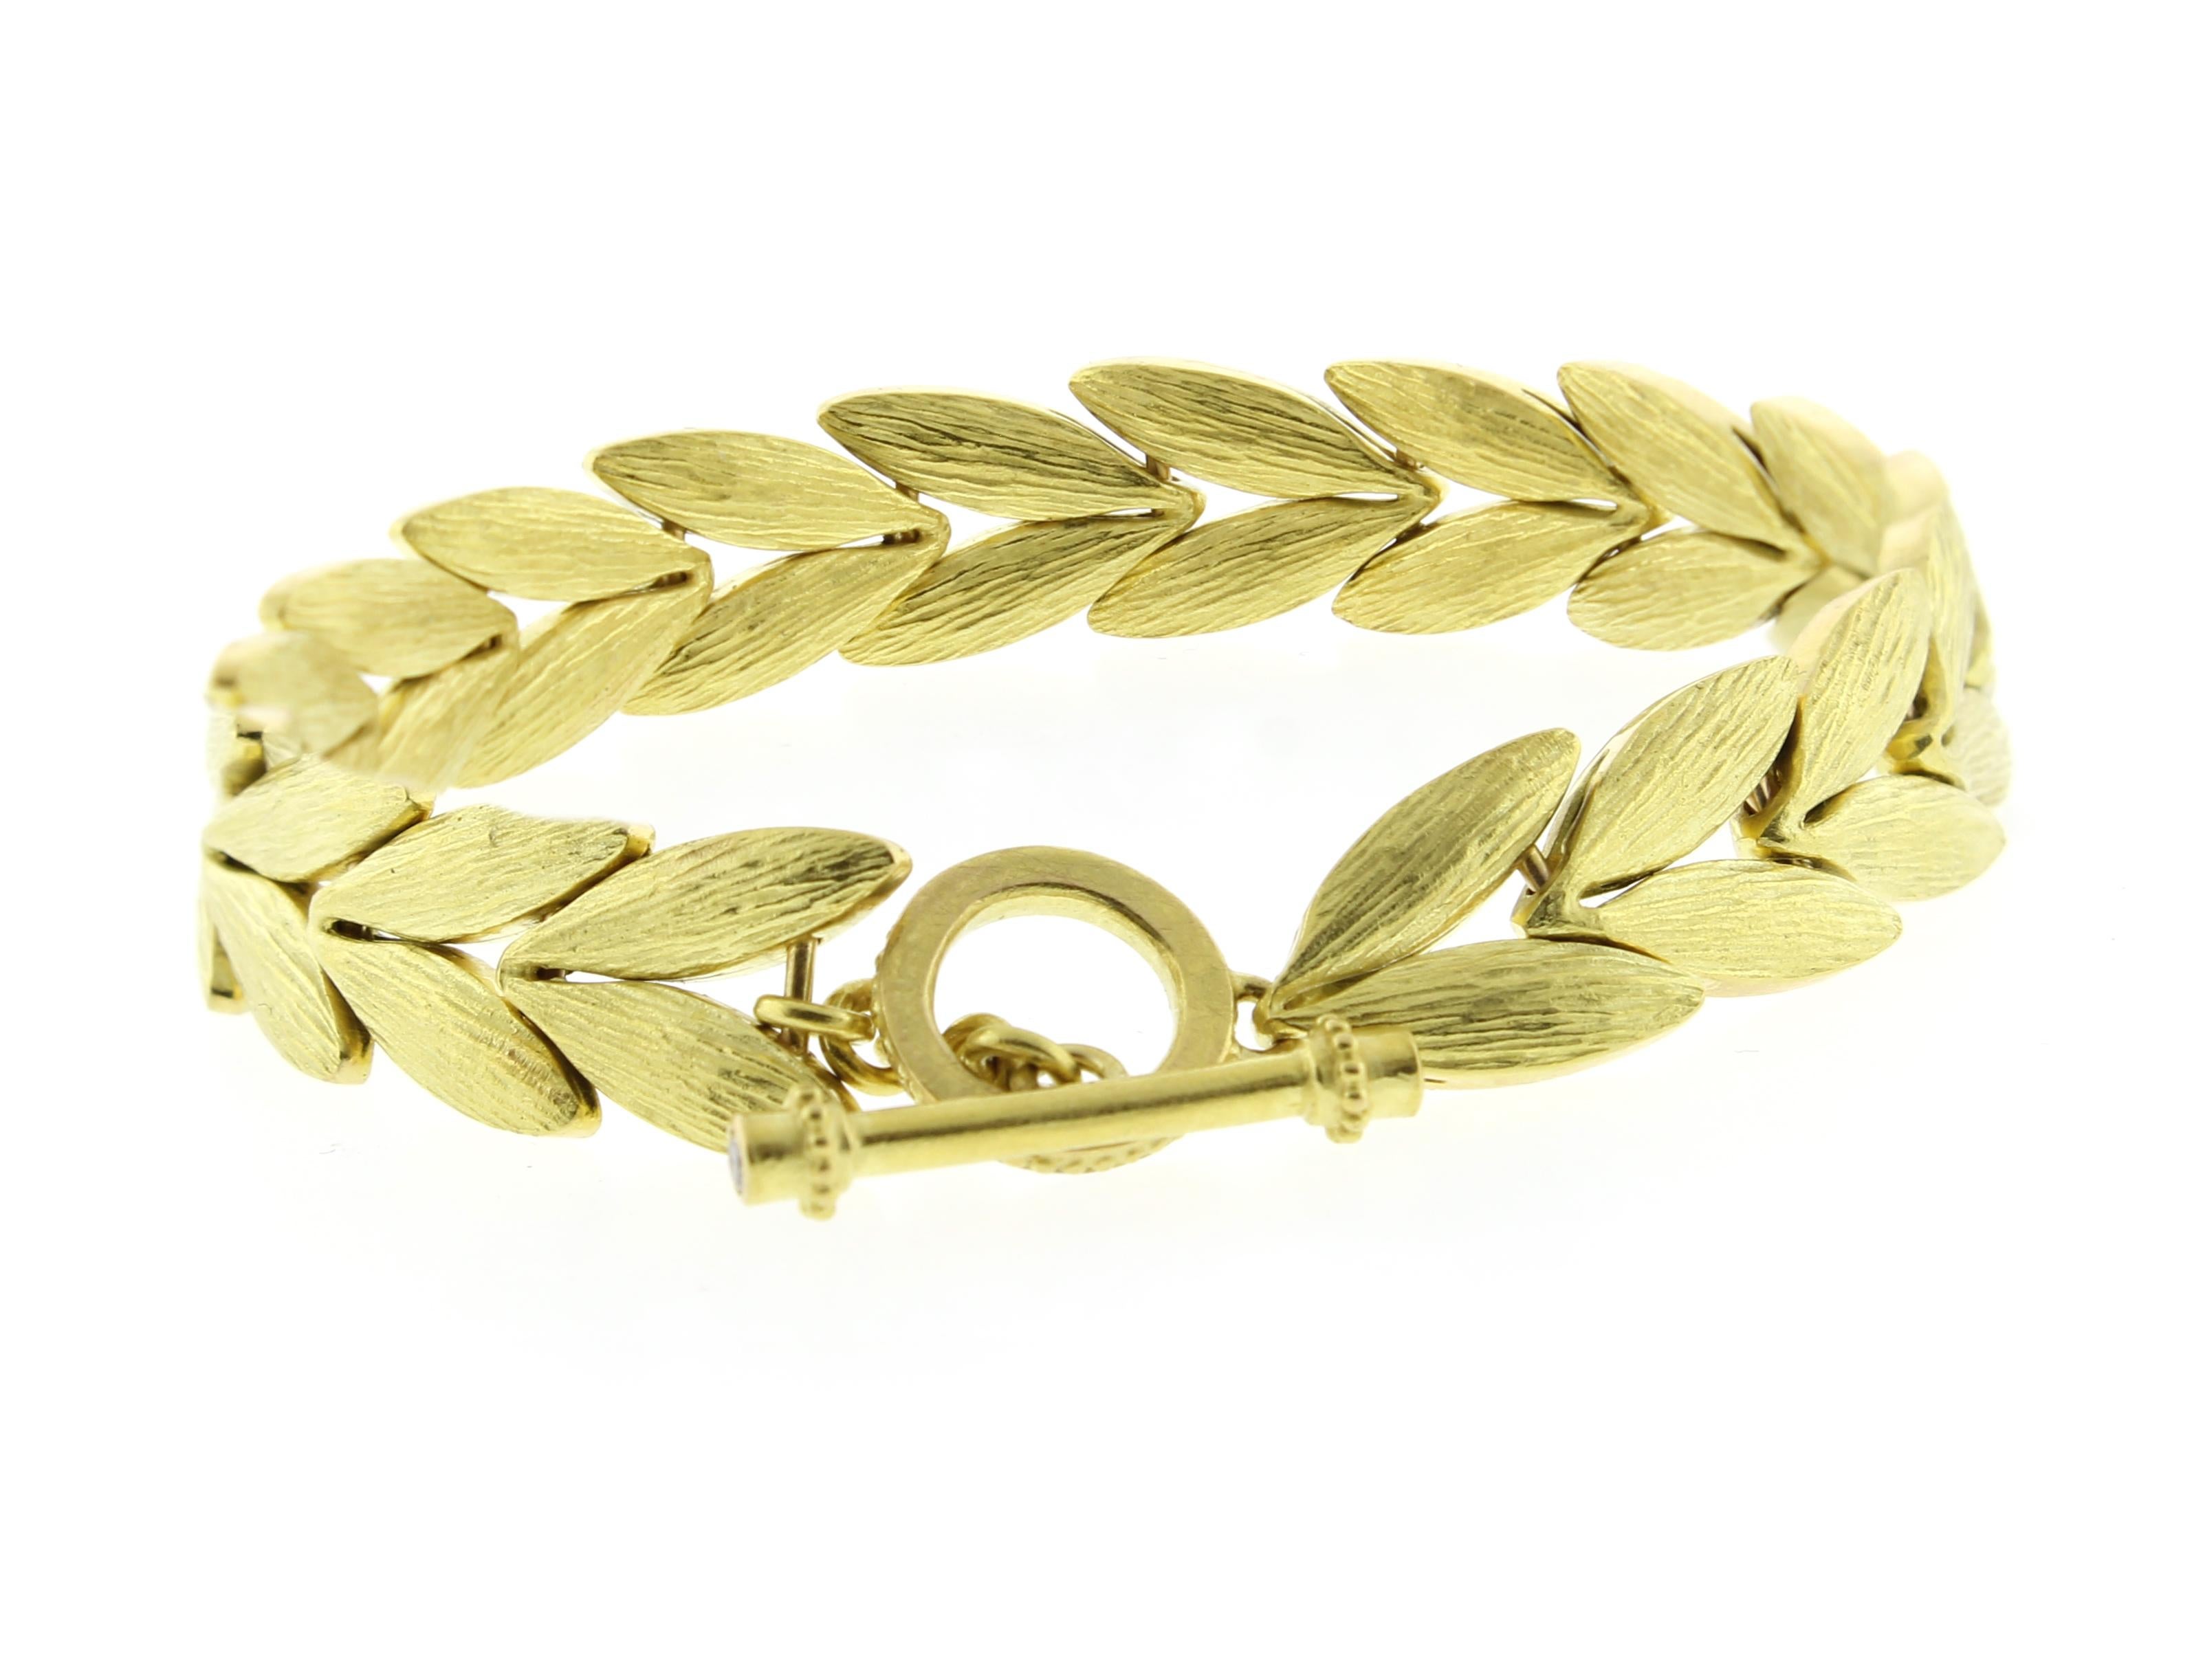 From Acclaimed jewelry artesian Barbara Heinrich her double leaf wheatberry bracelet. The bracelet is 7 inches long 7/16ths of an inch wide 35.7 grams. The current retail, style BH372 is $13200